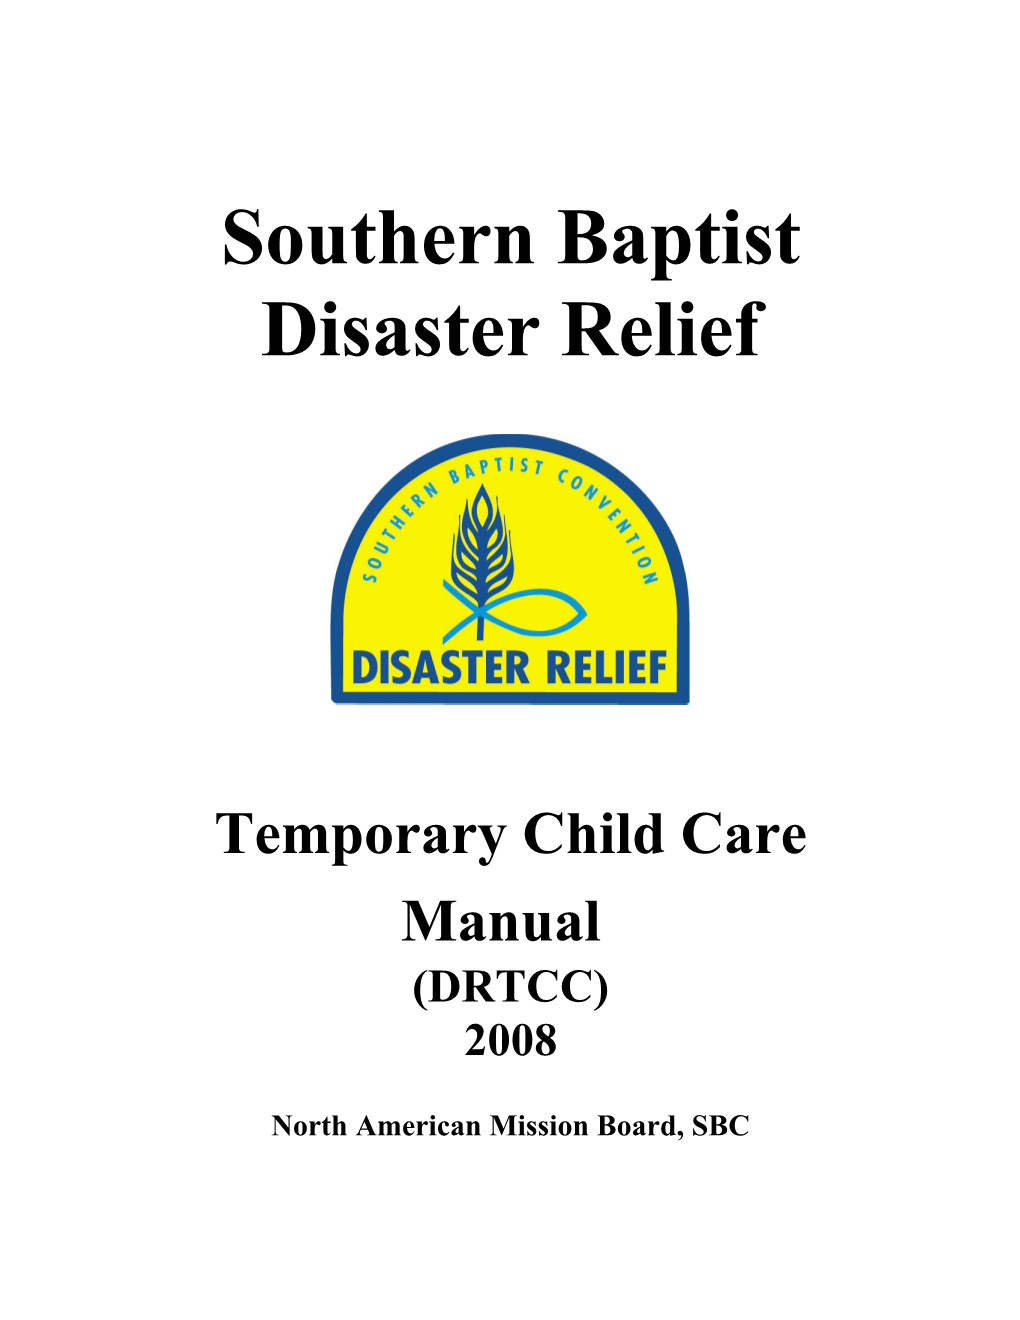 Temporary Emergency Child Care